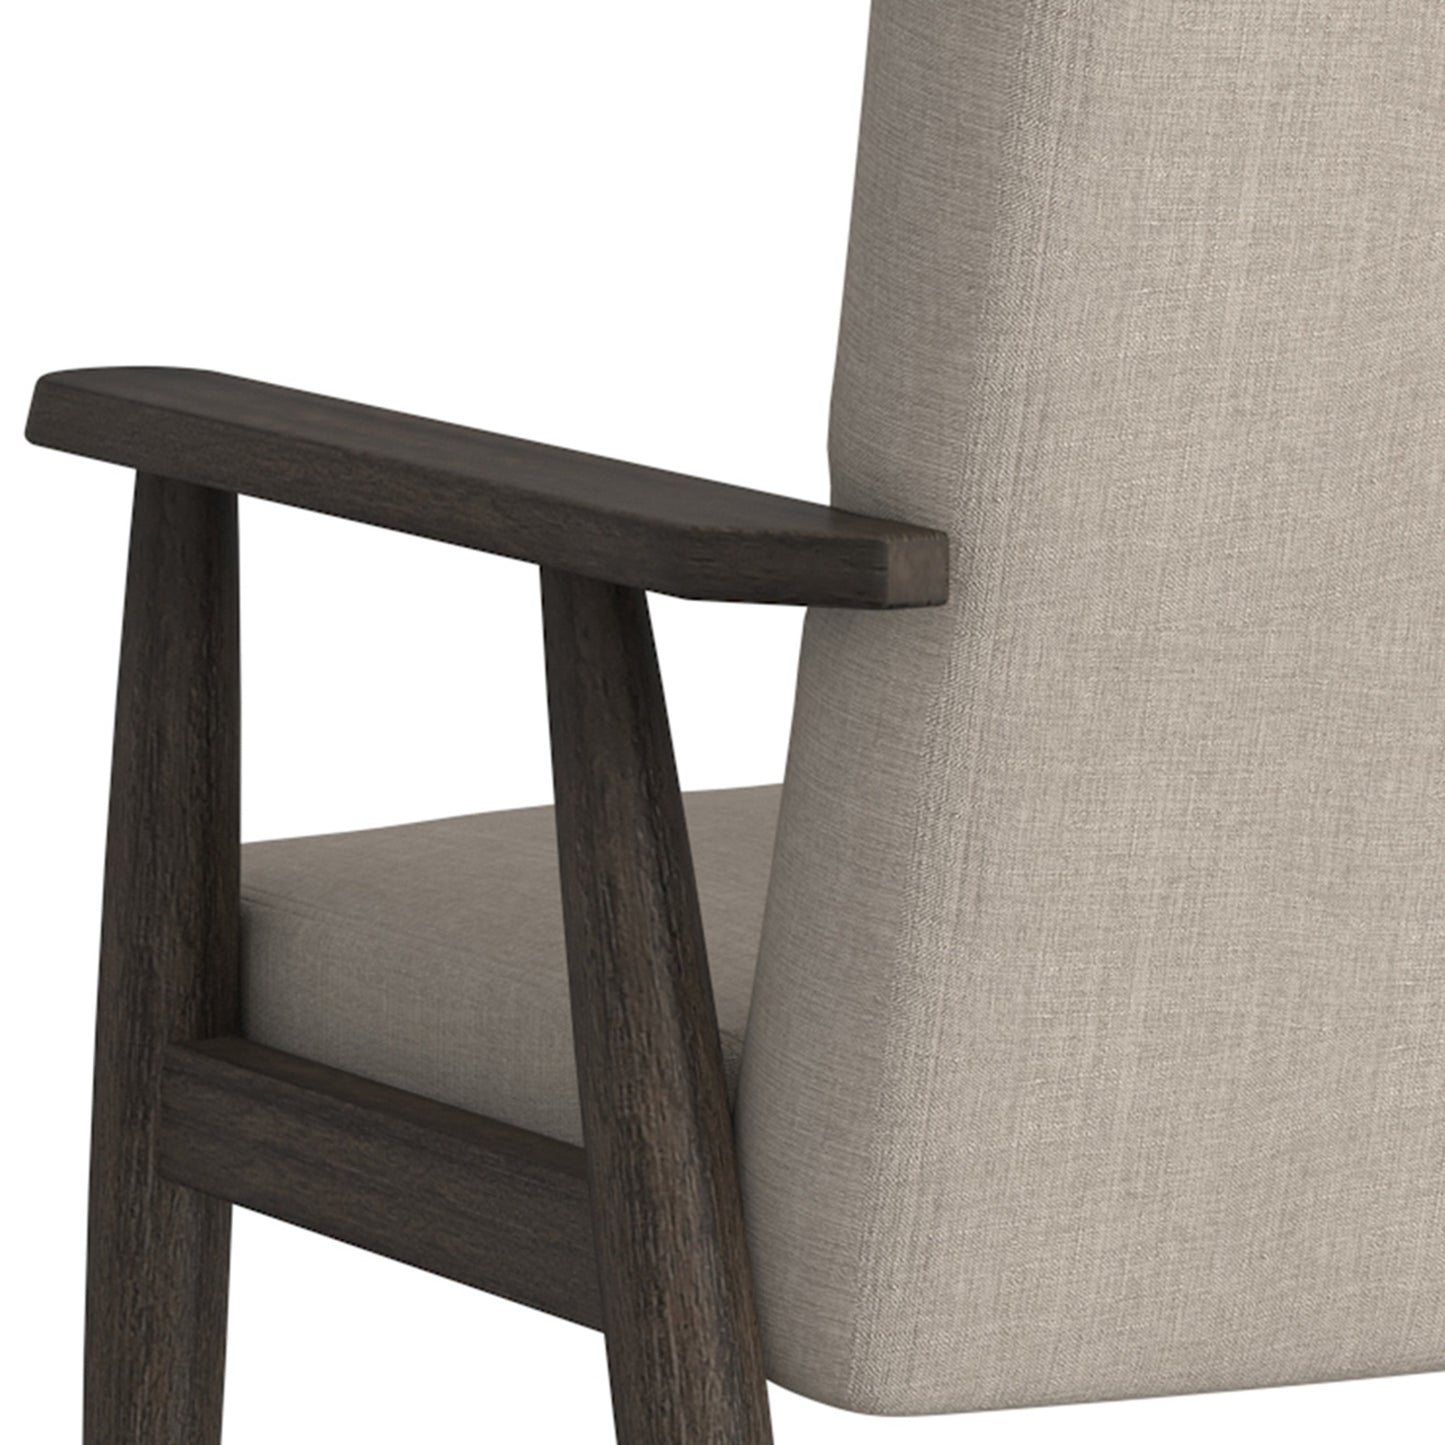 Huxly Accent Chair in Beige and Weathered Brown - WW